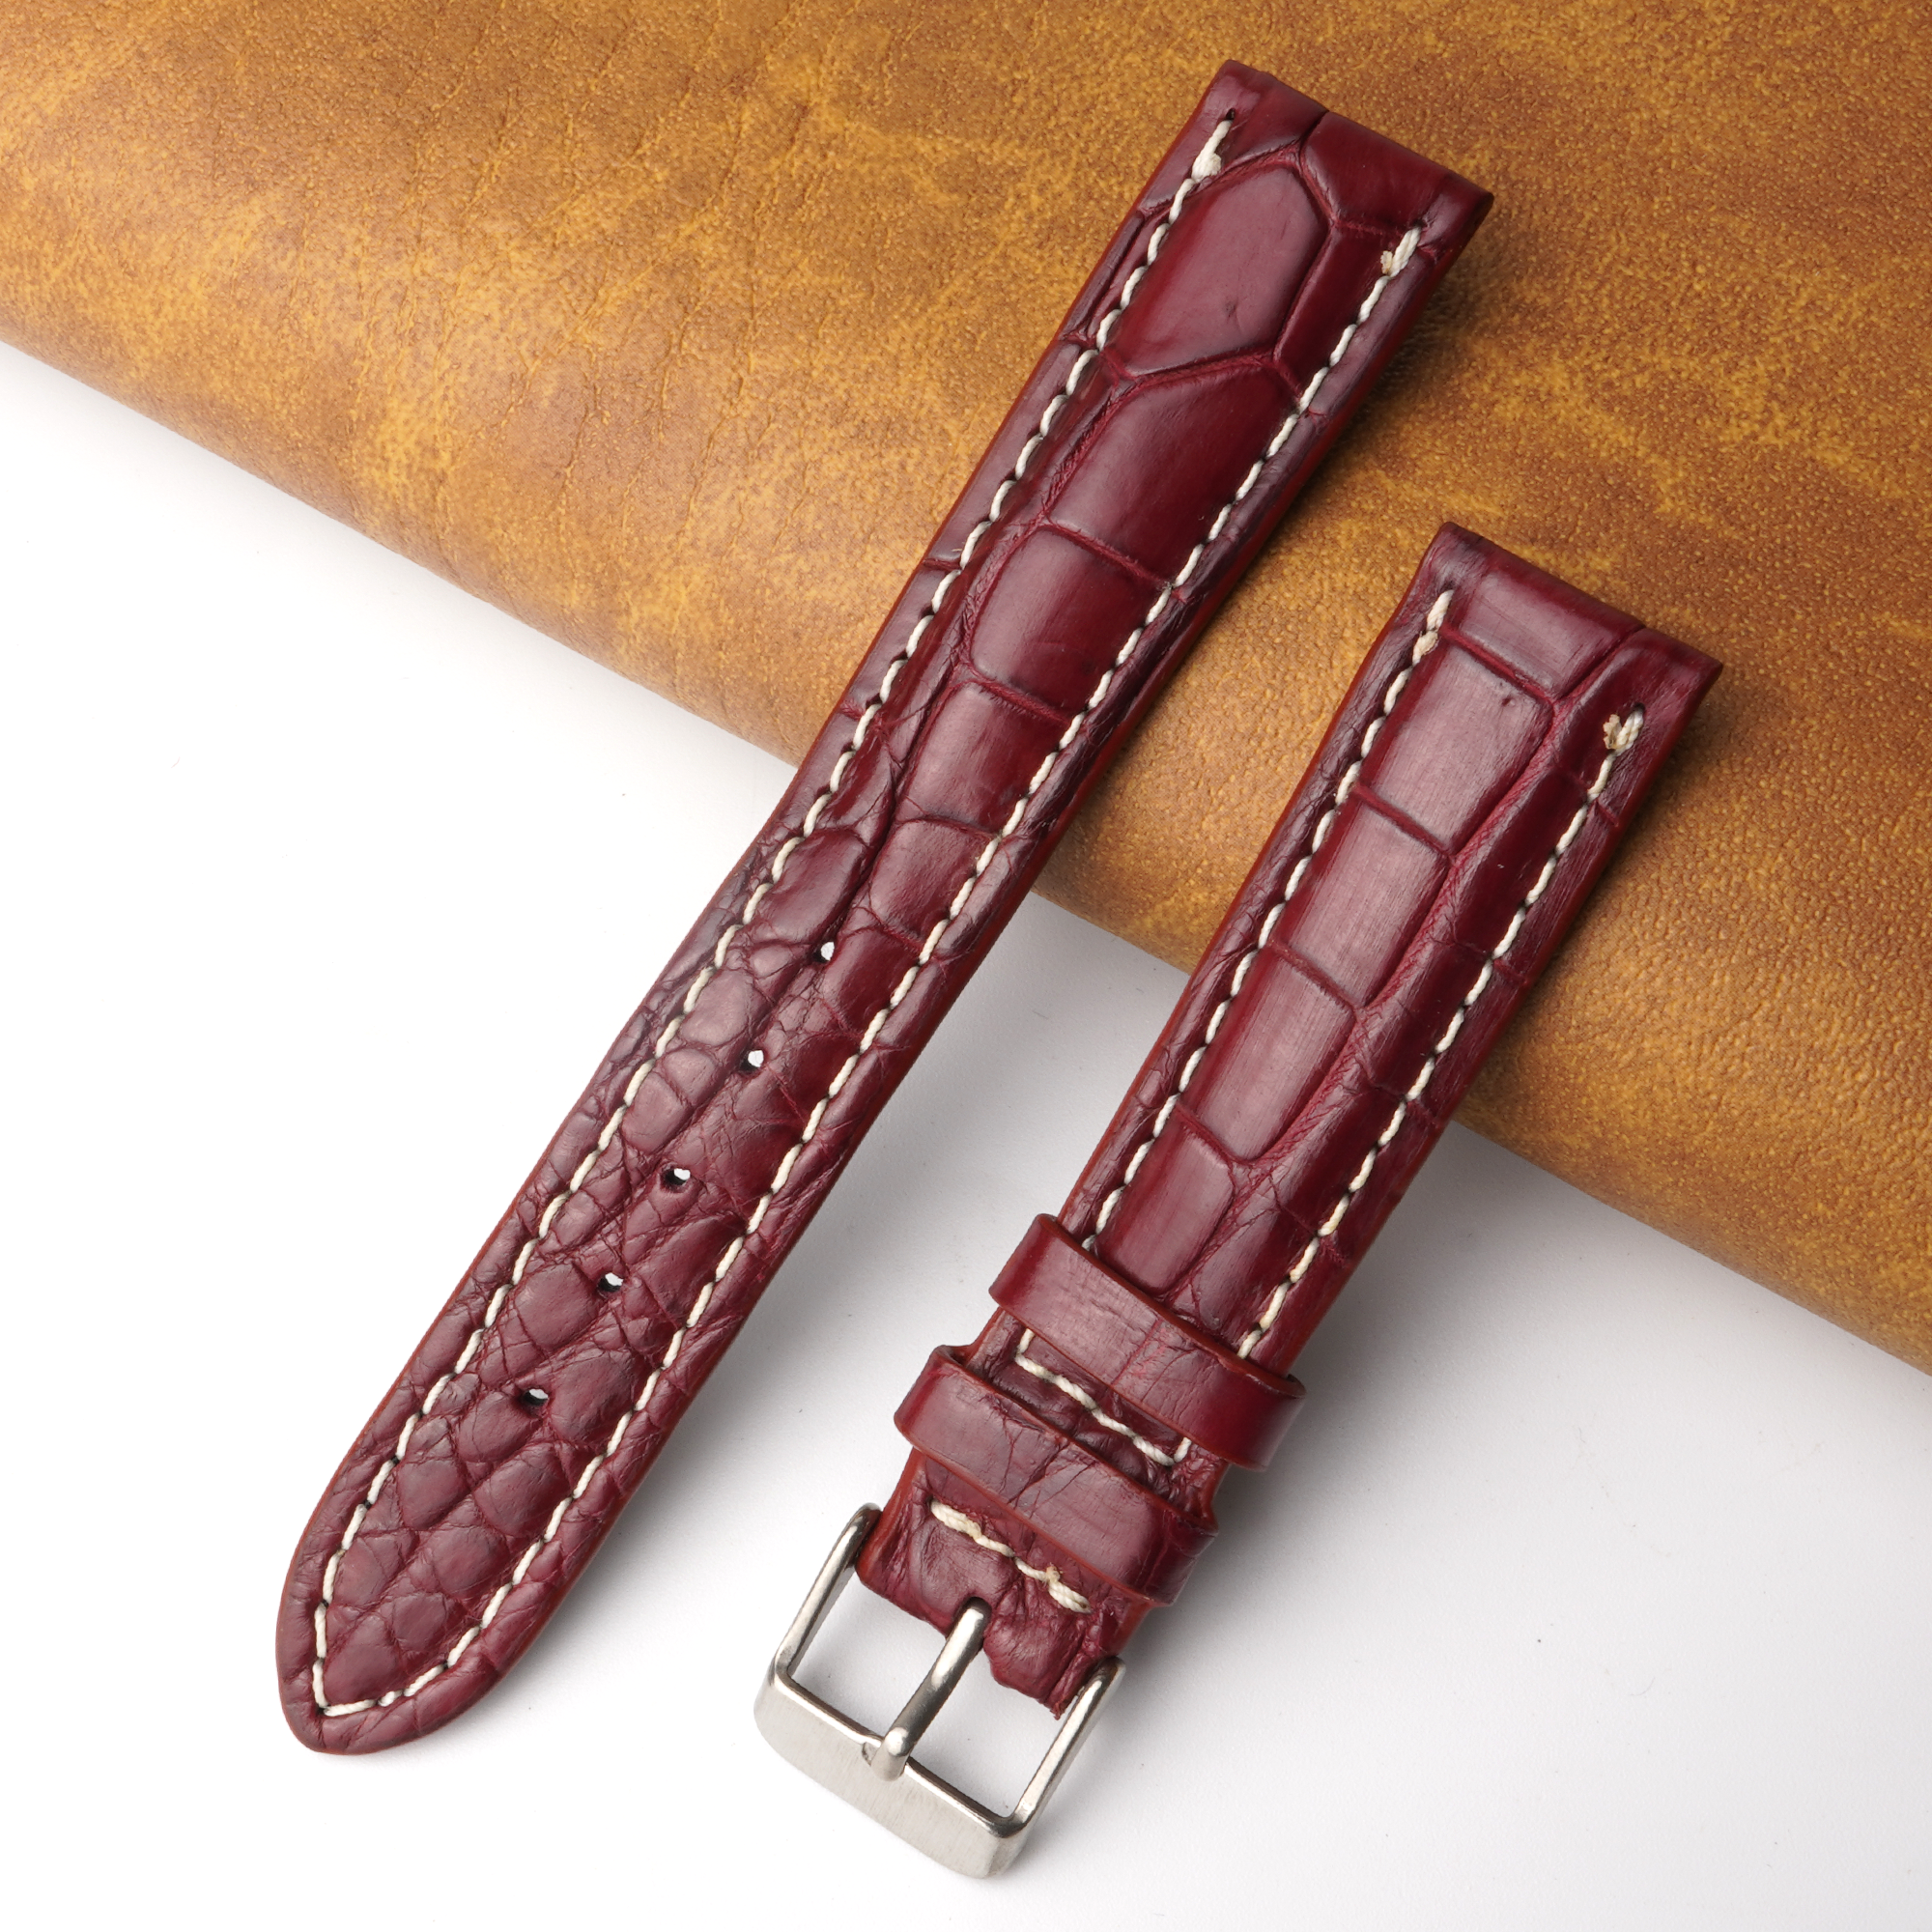 18mm Burgundy Unique Pattern Alligator Leather Watch Band For Men DH-224T